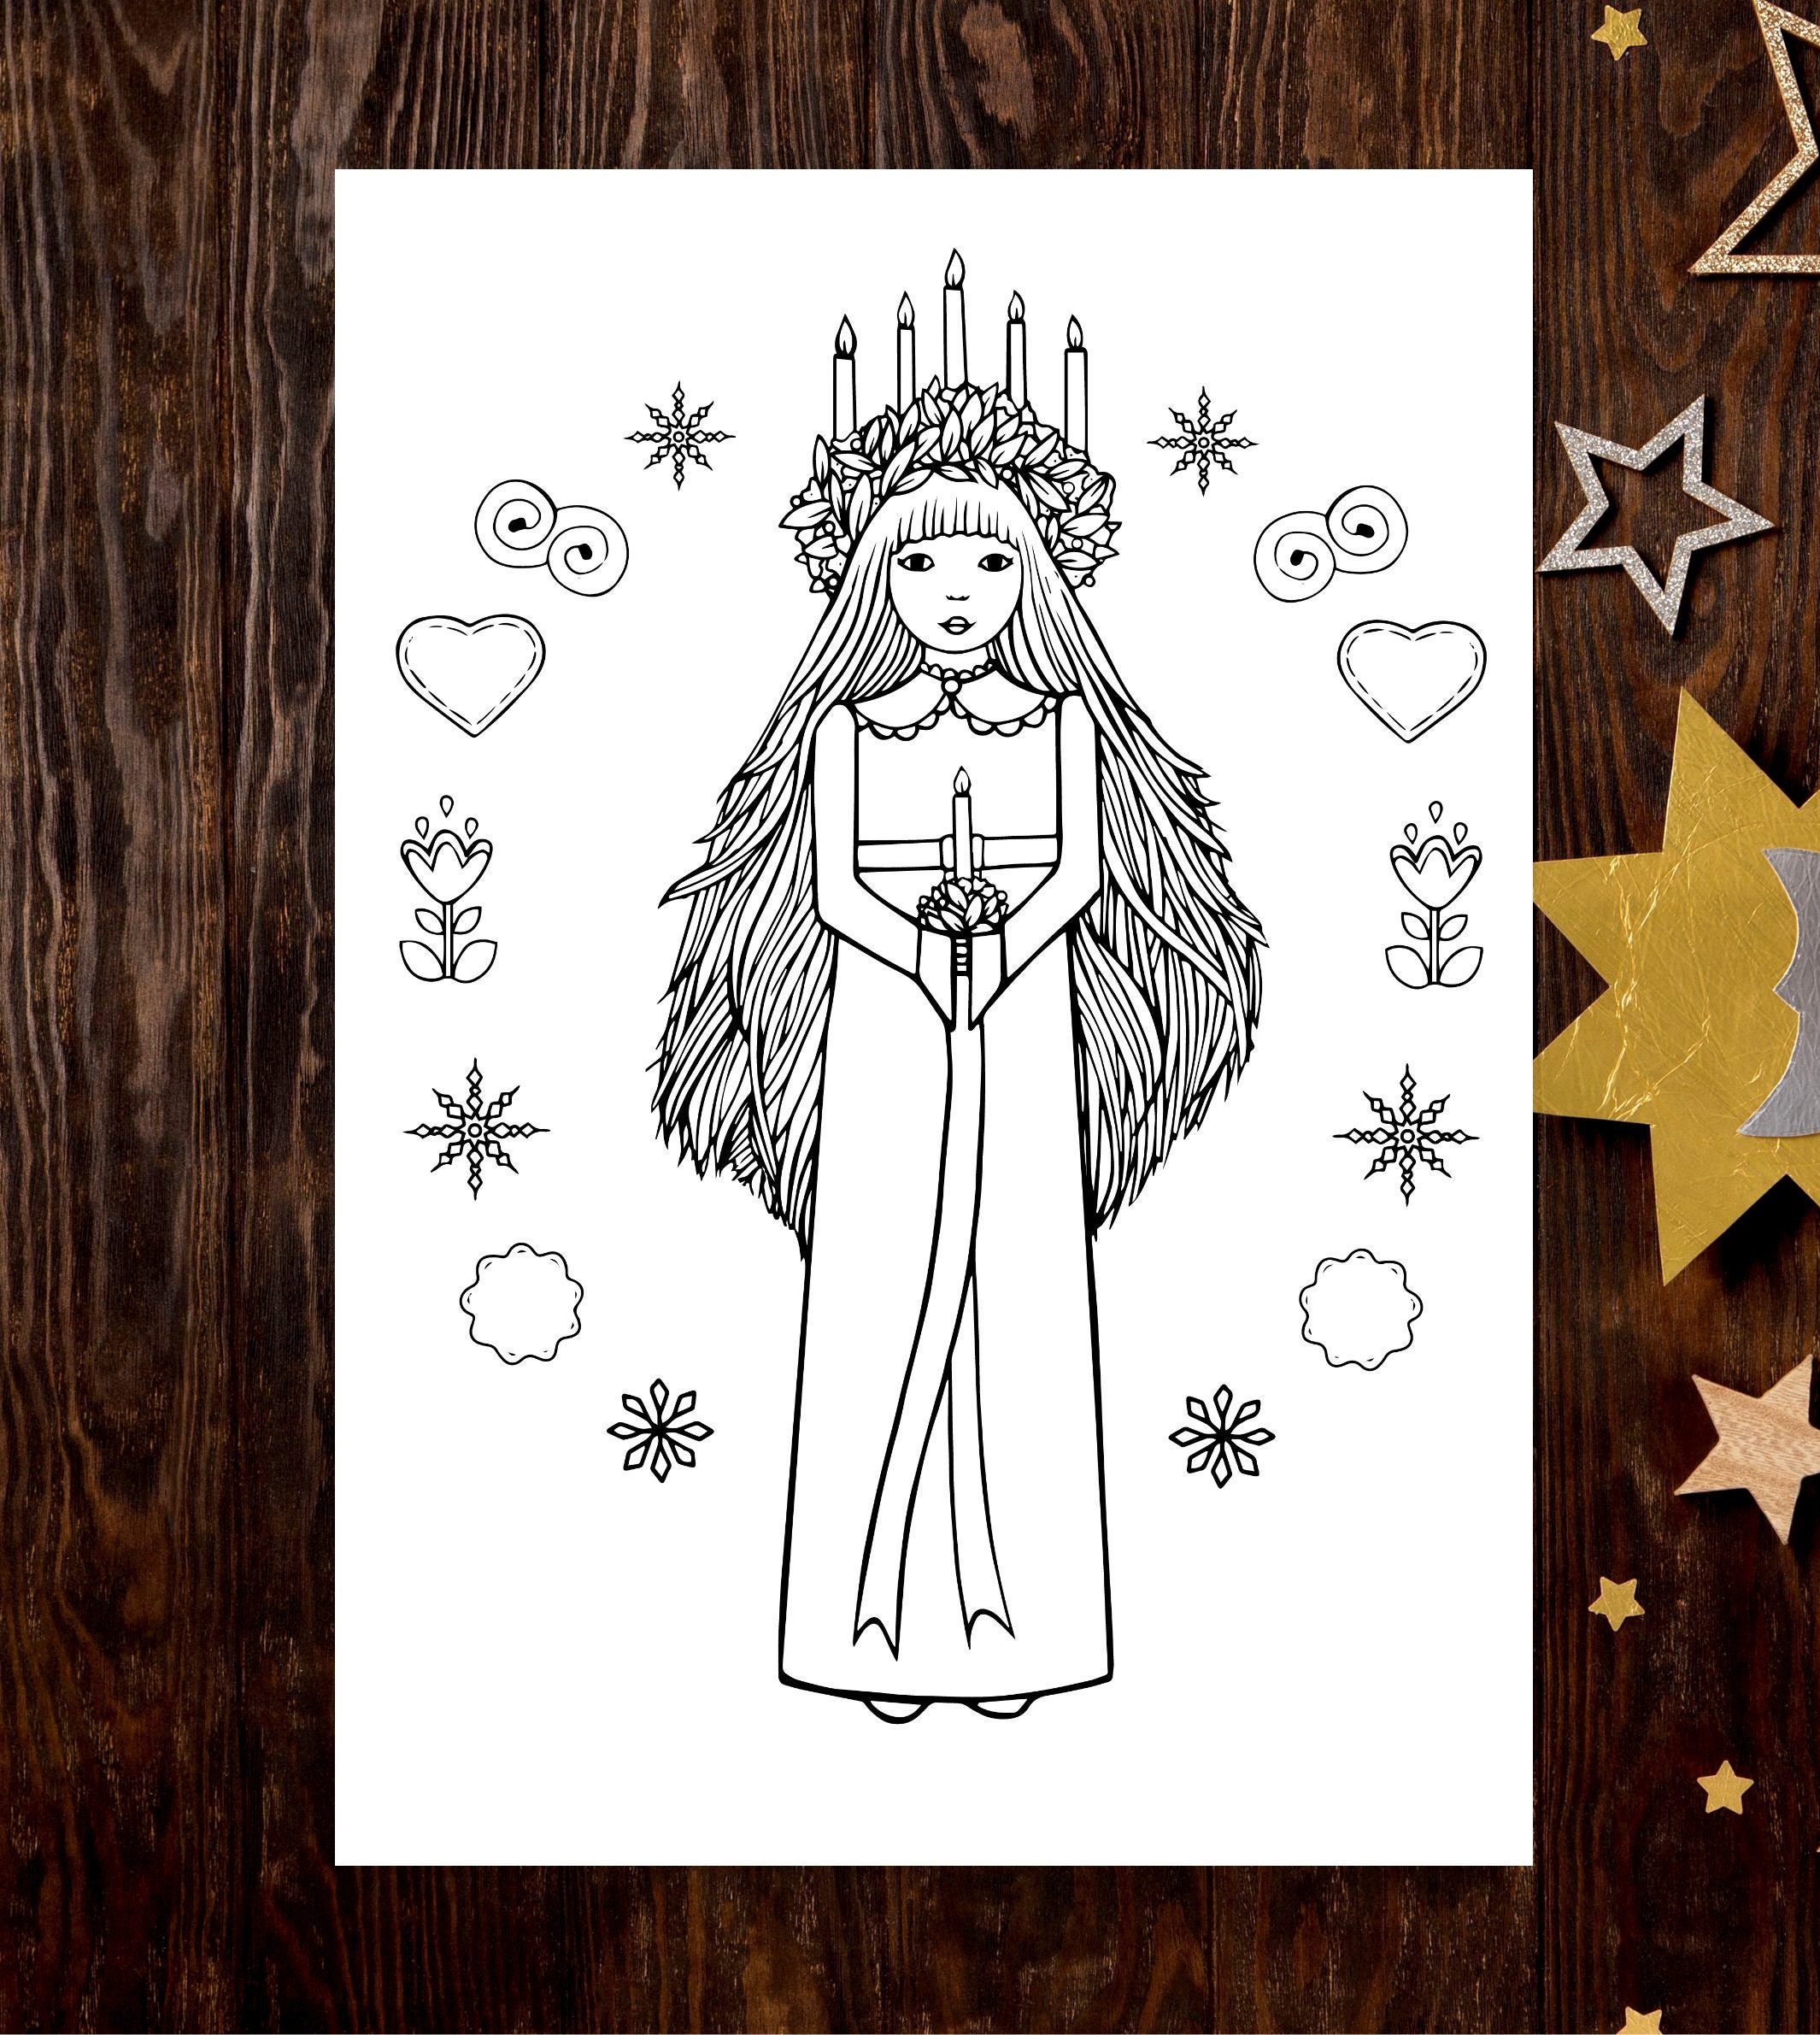 Lucia day colouring page digital download artwork saint lucy swedish lucia scandinavian christmas decor st lucia day download now